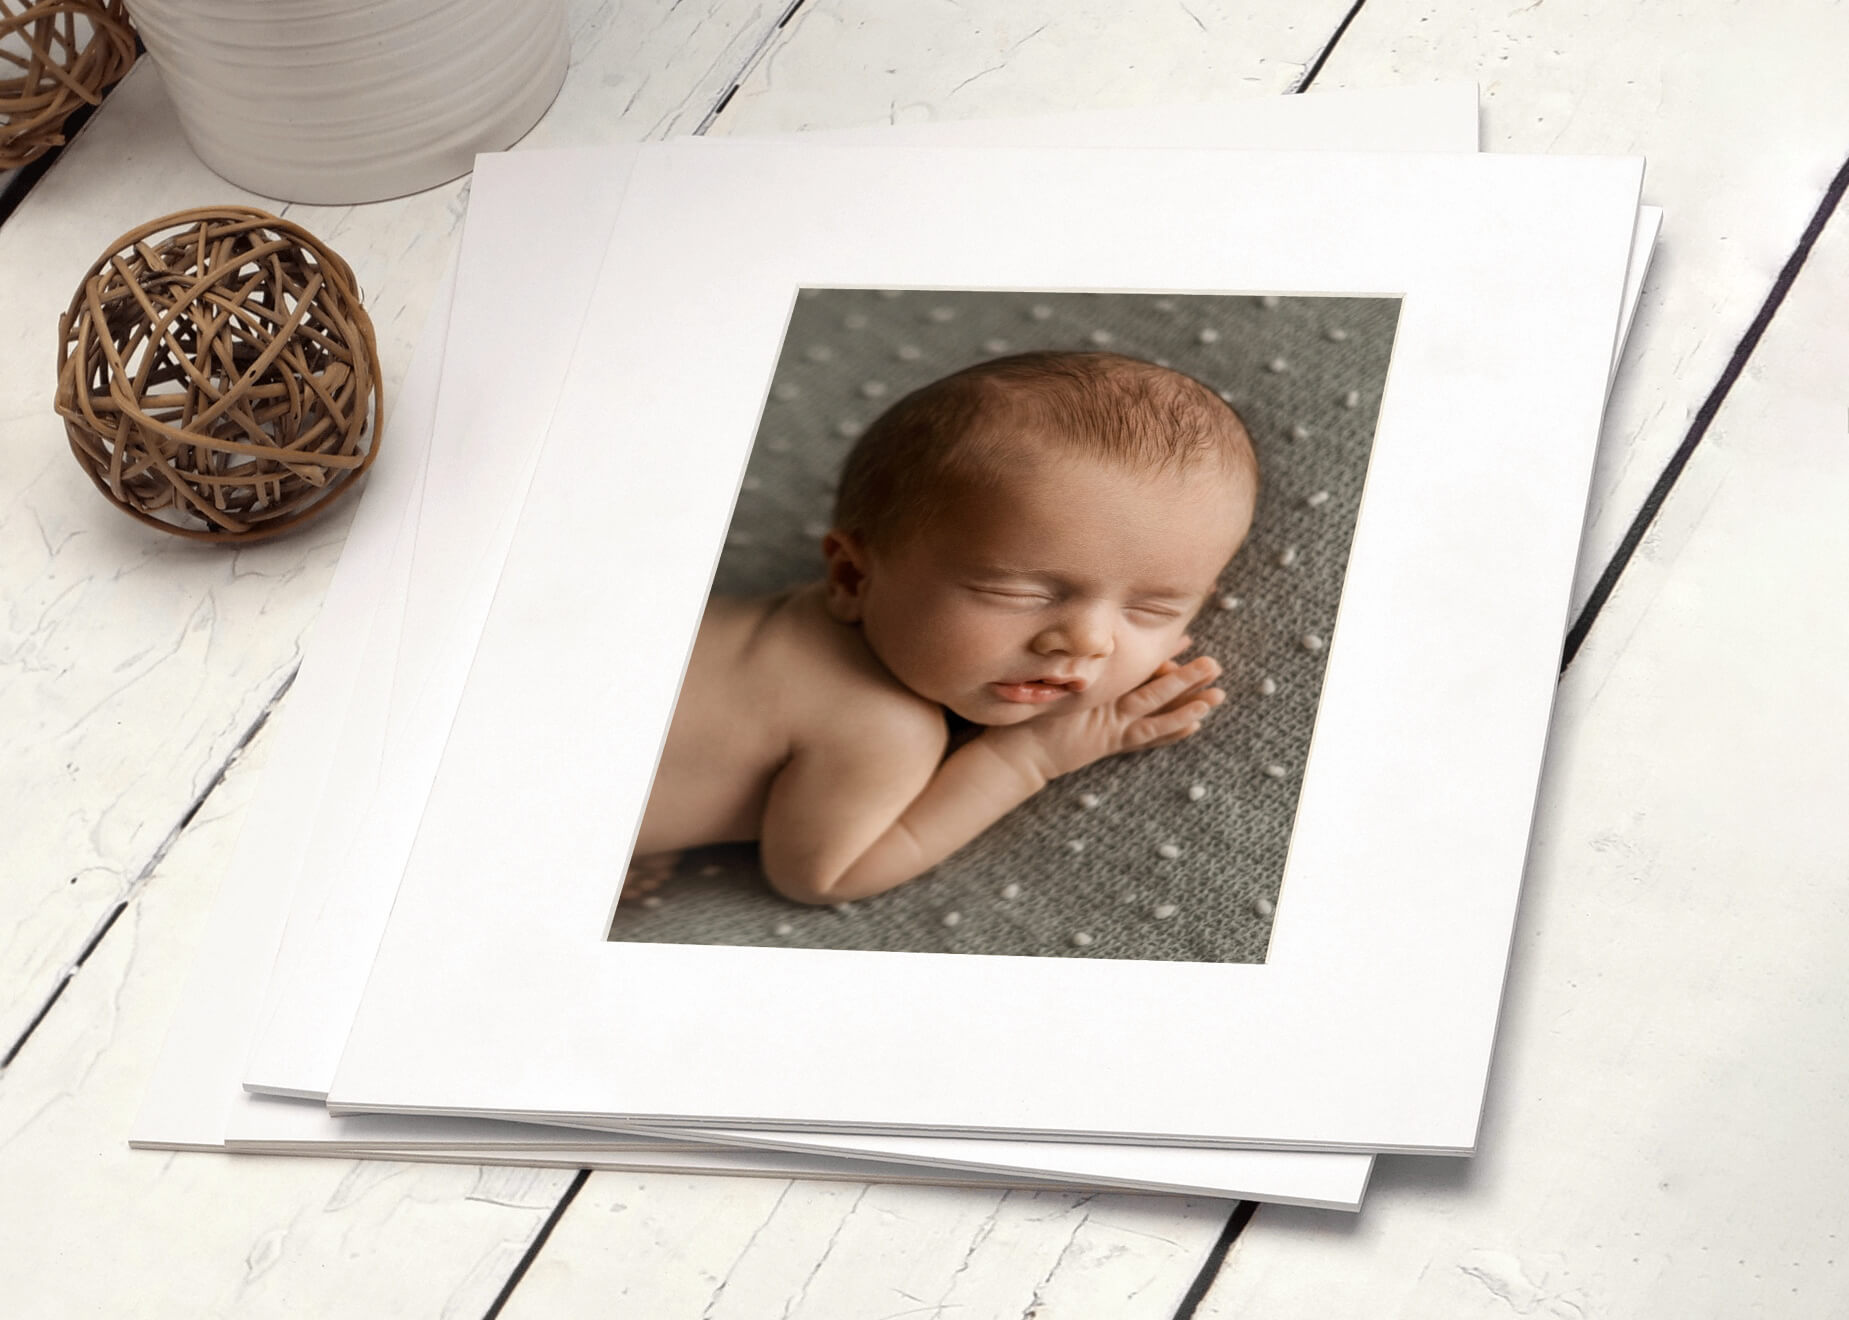 matted print of a newborn baby sitting on a white wood floor printed by a professional photographer